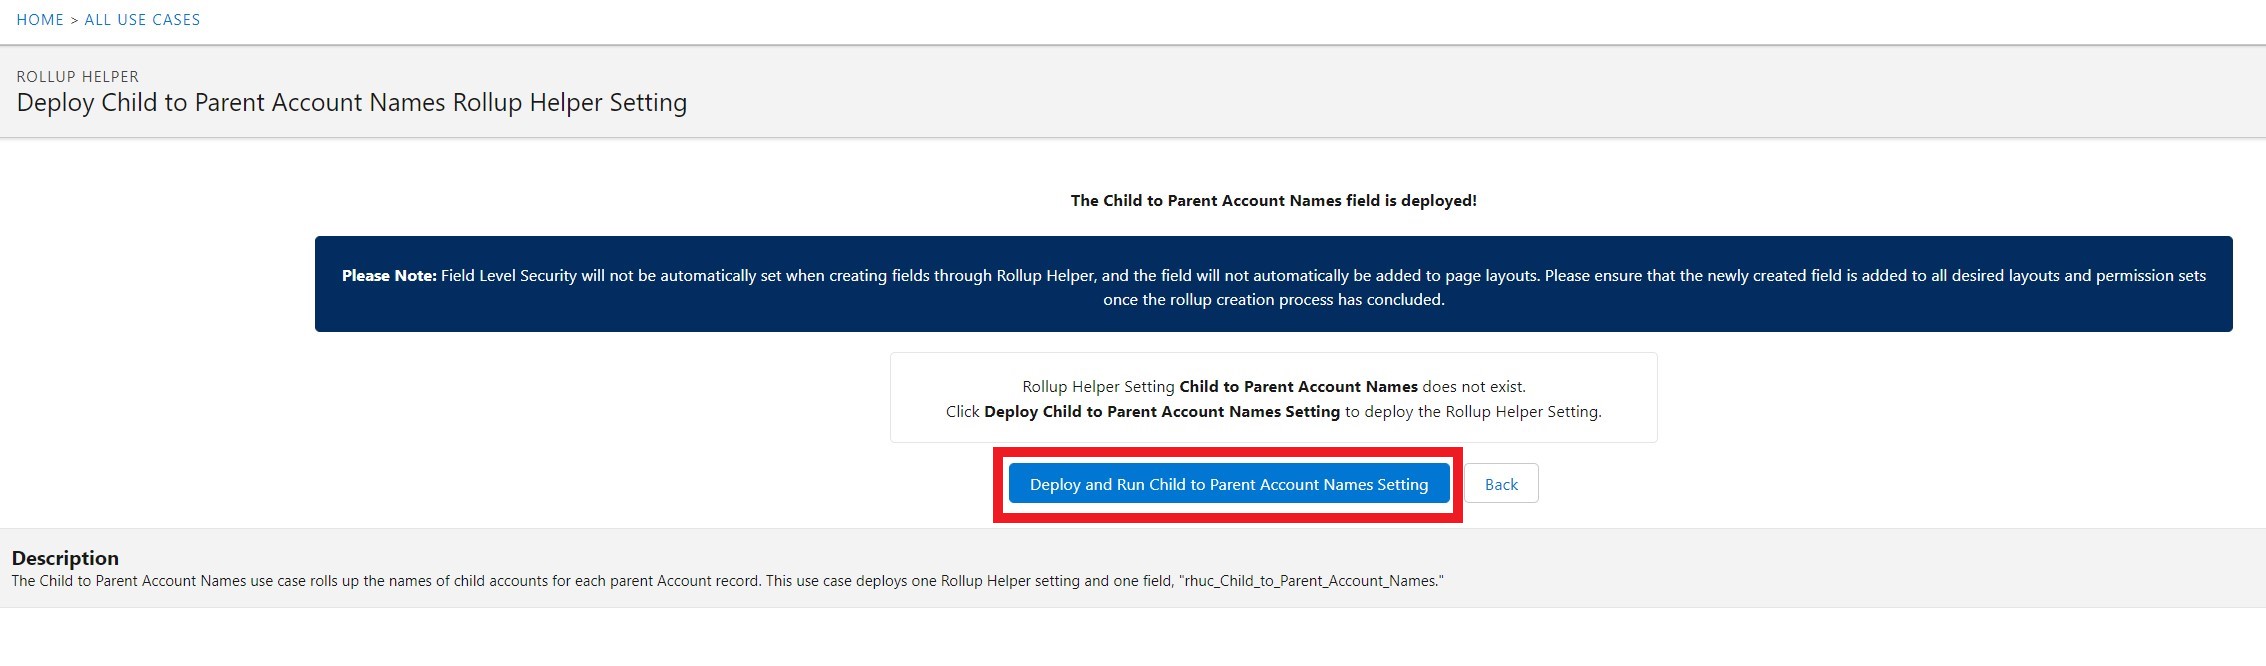 Child to Parent Account Names deploy setting